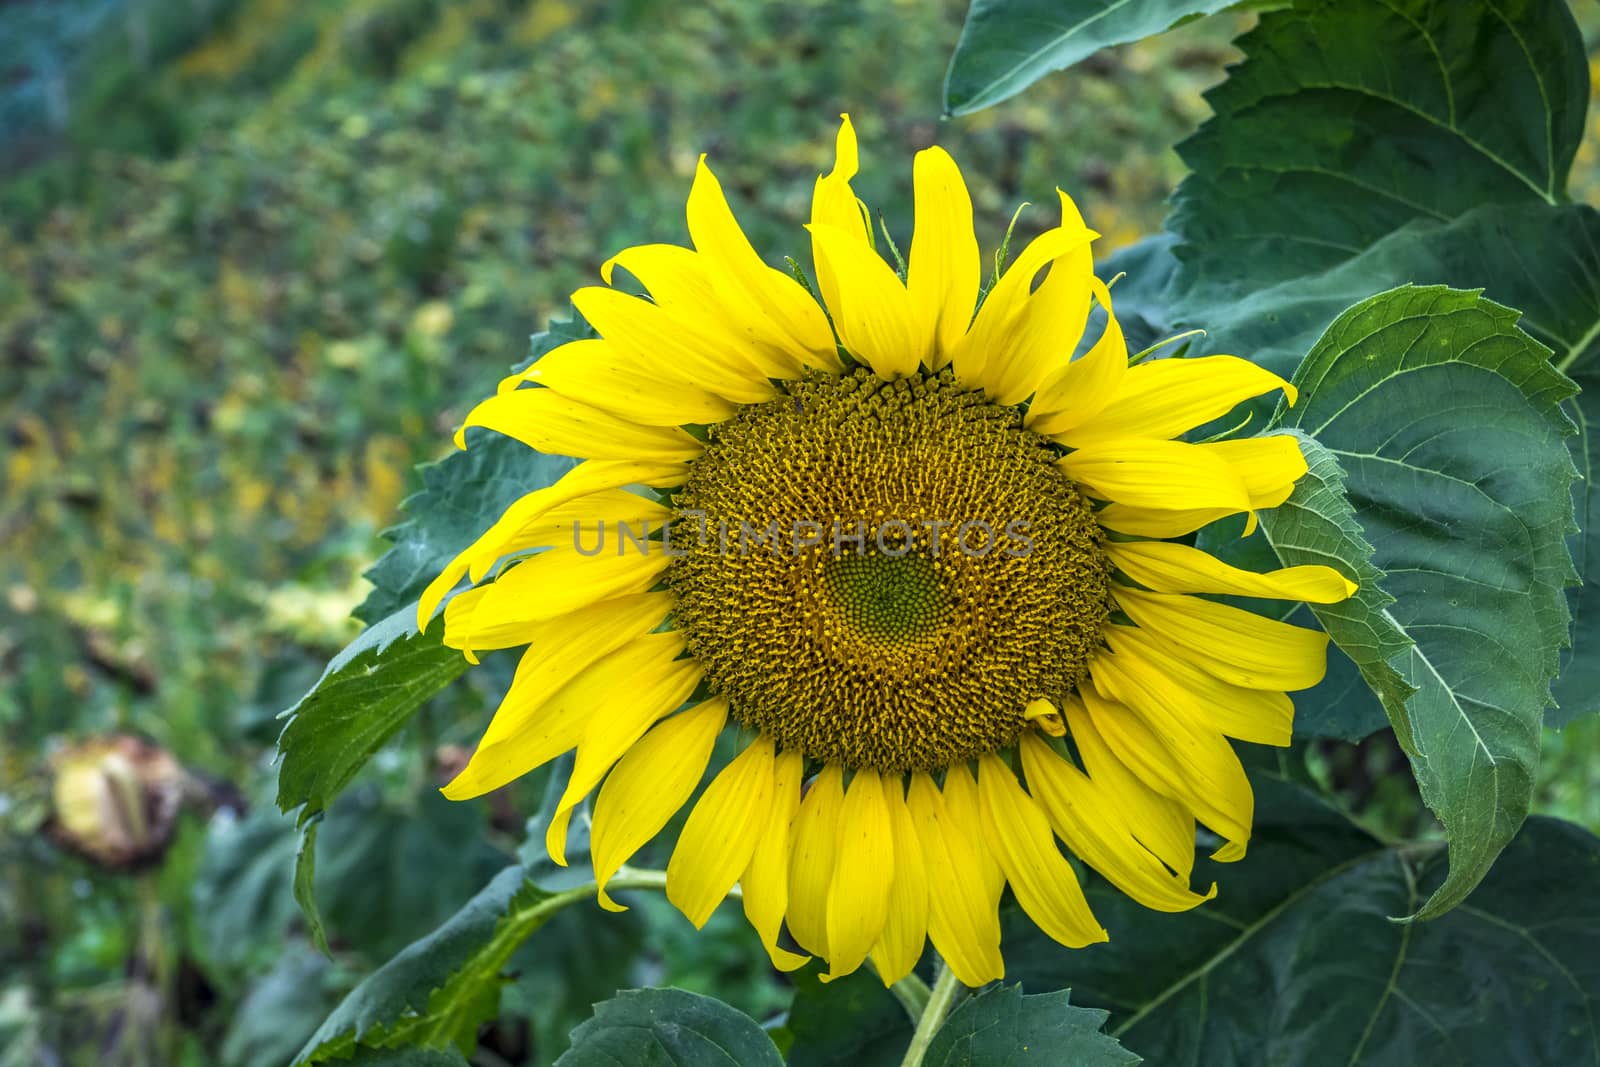 The sunflowers in Mon Cheam of Chiang Mai, Thailand.